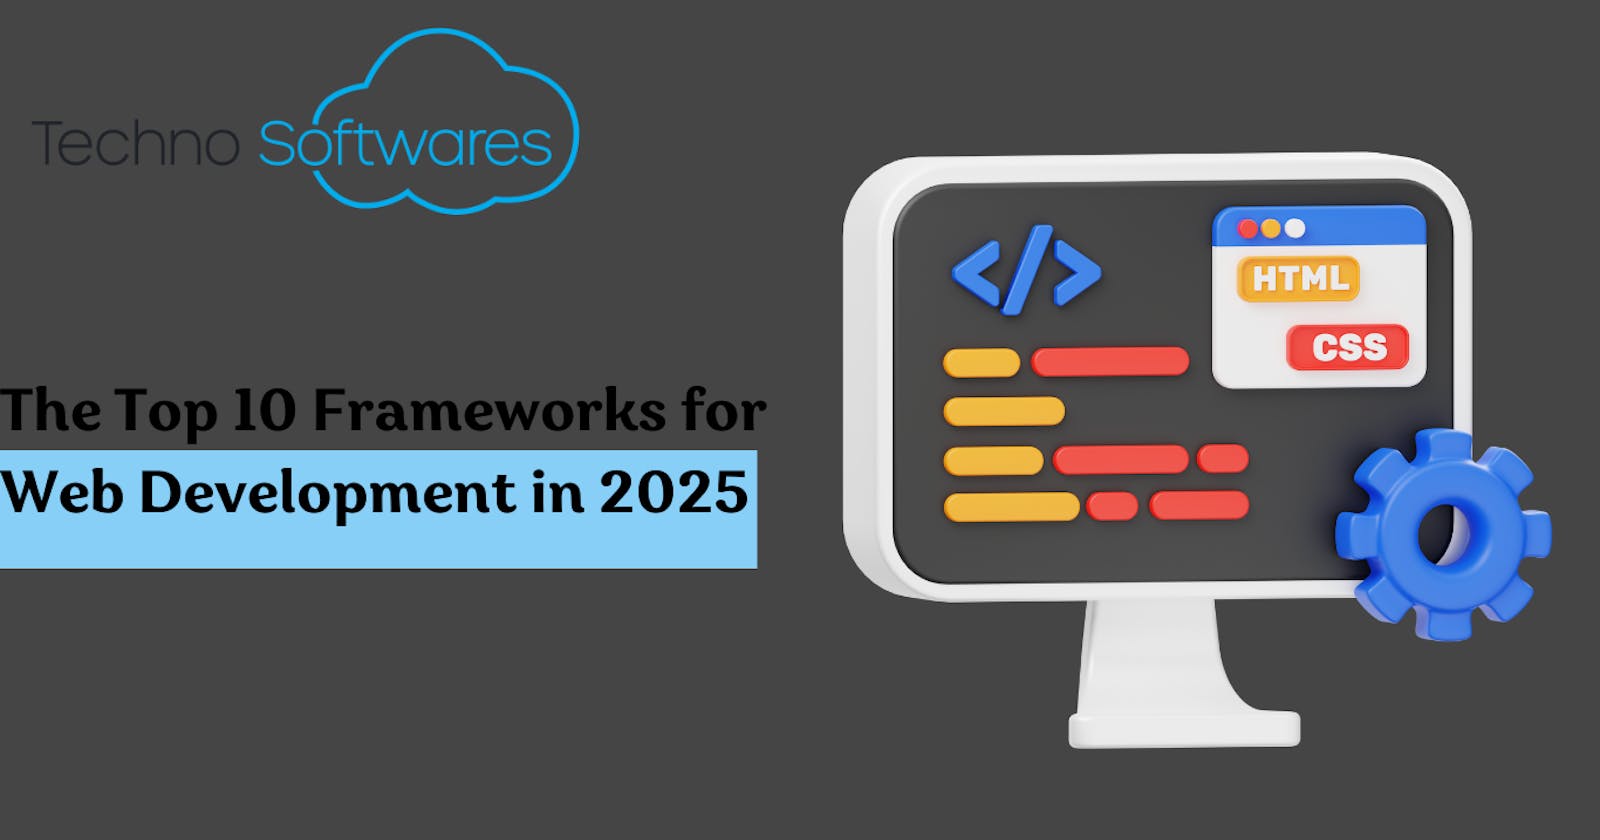 The Top 10 Frameworks for Web Development in 2025